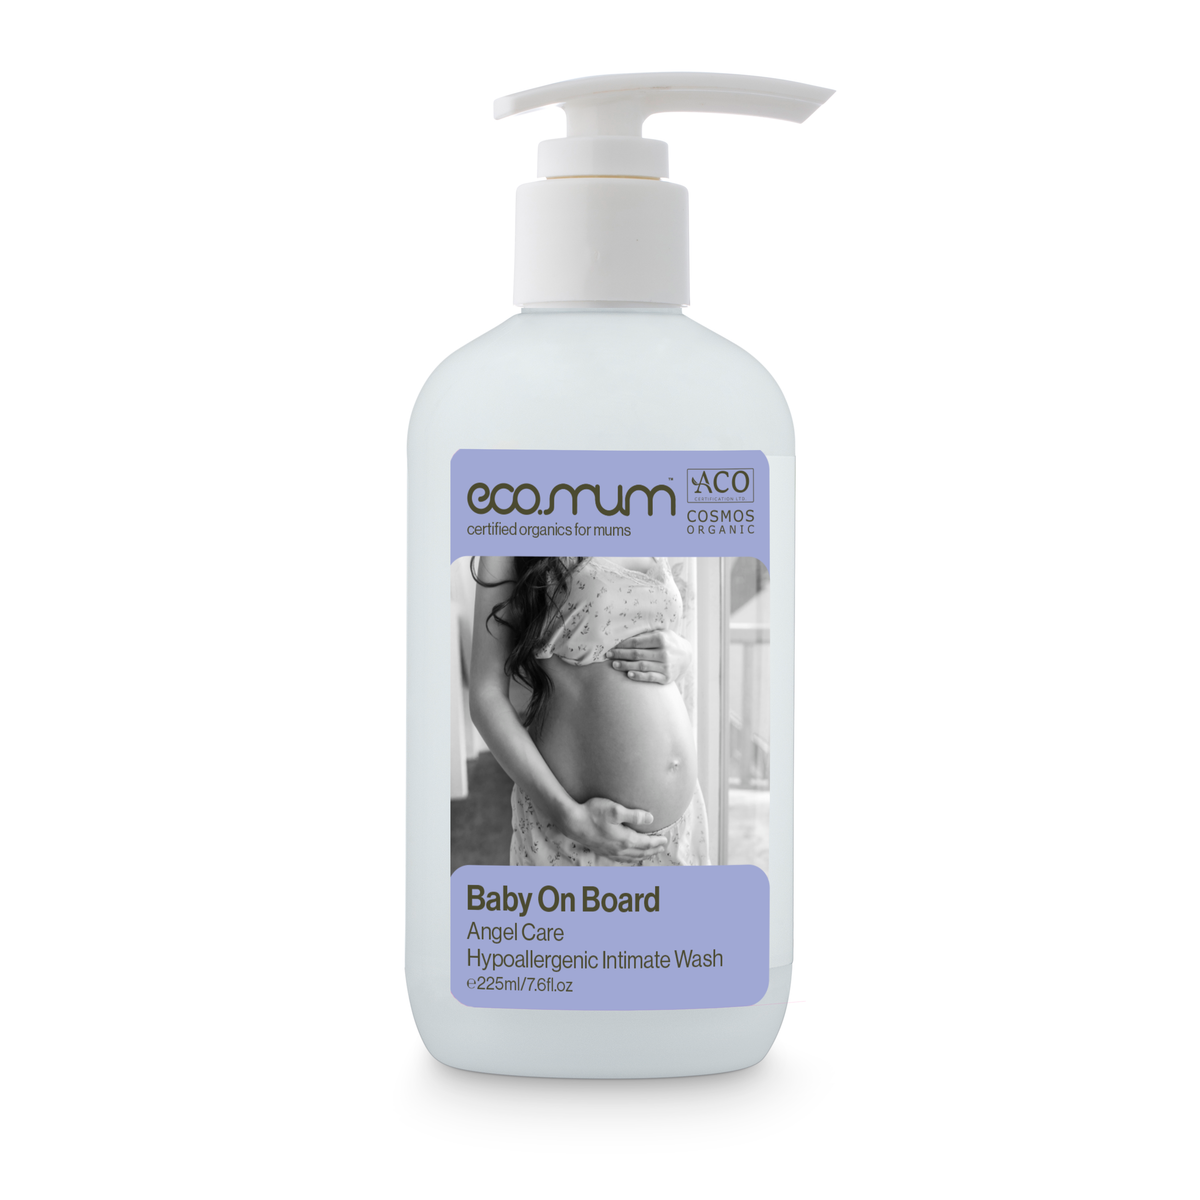 Baby on Board Angel Care Hypoallergenic Intimate Wash